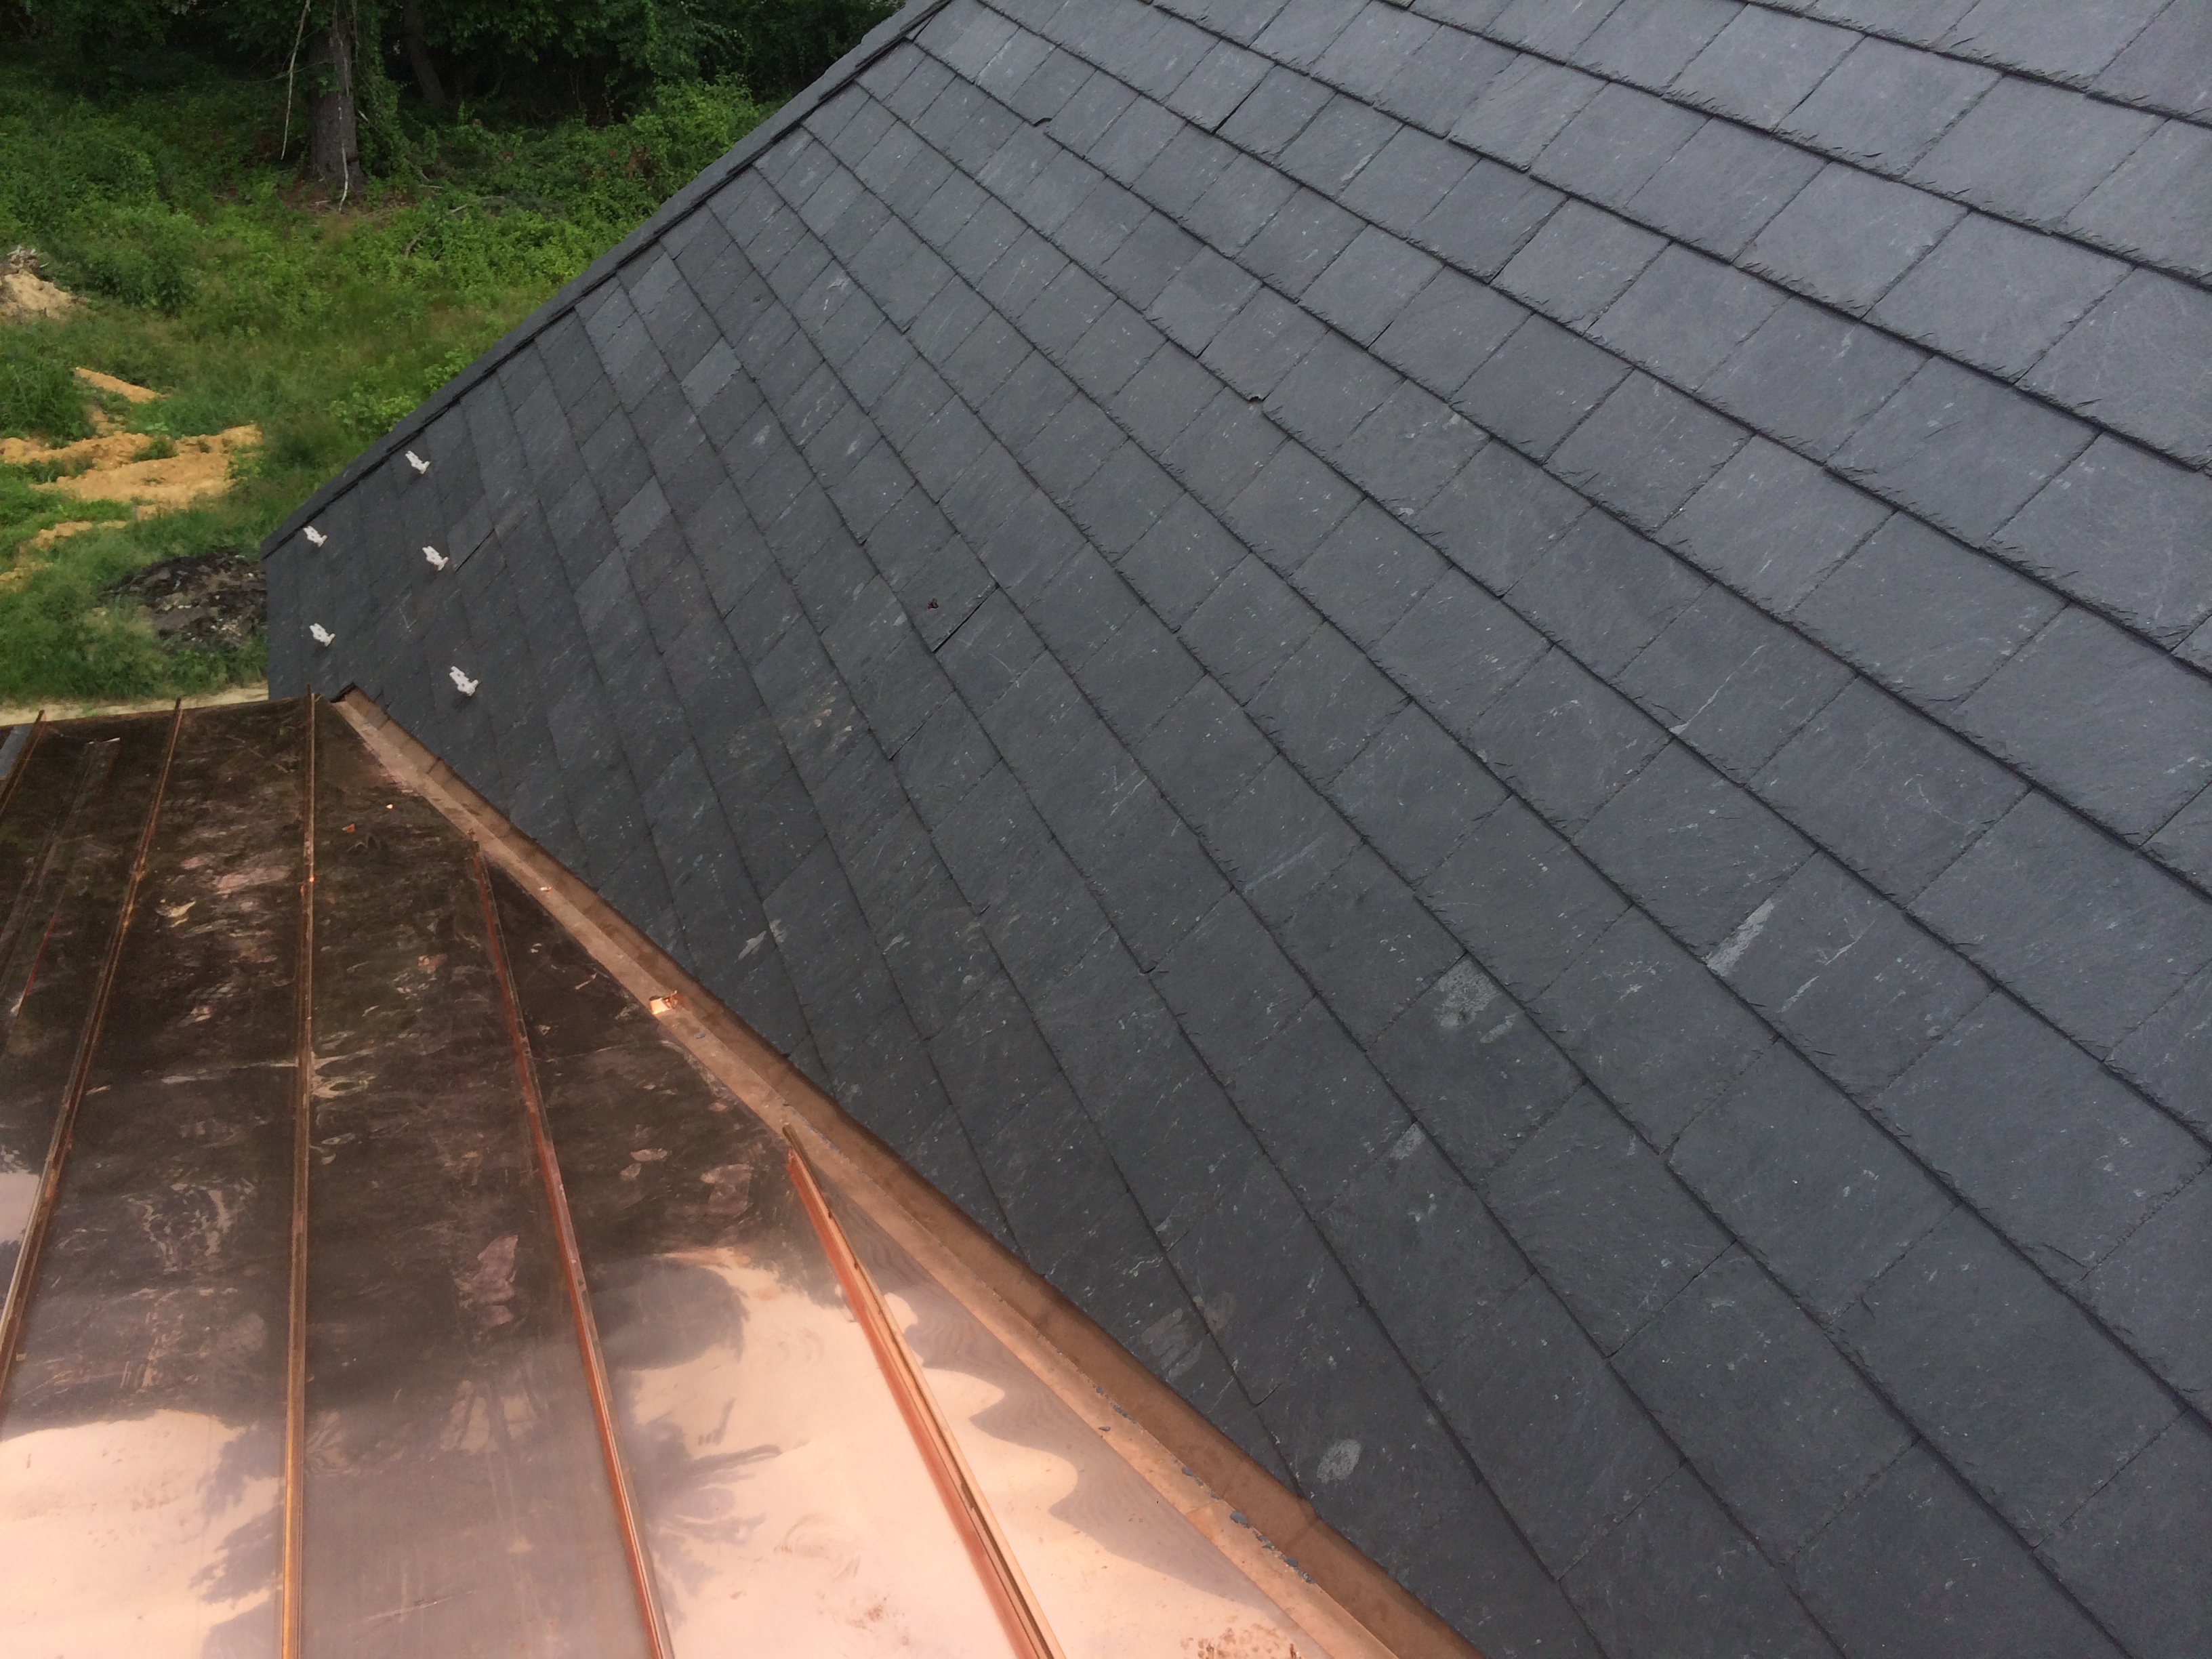 New Slate Roof Installation Estimate in NJ from LGC Construction